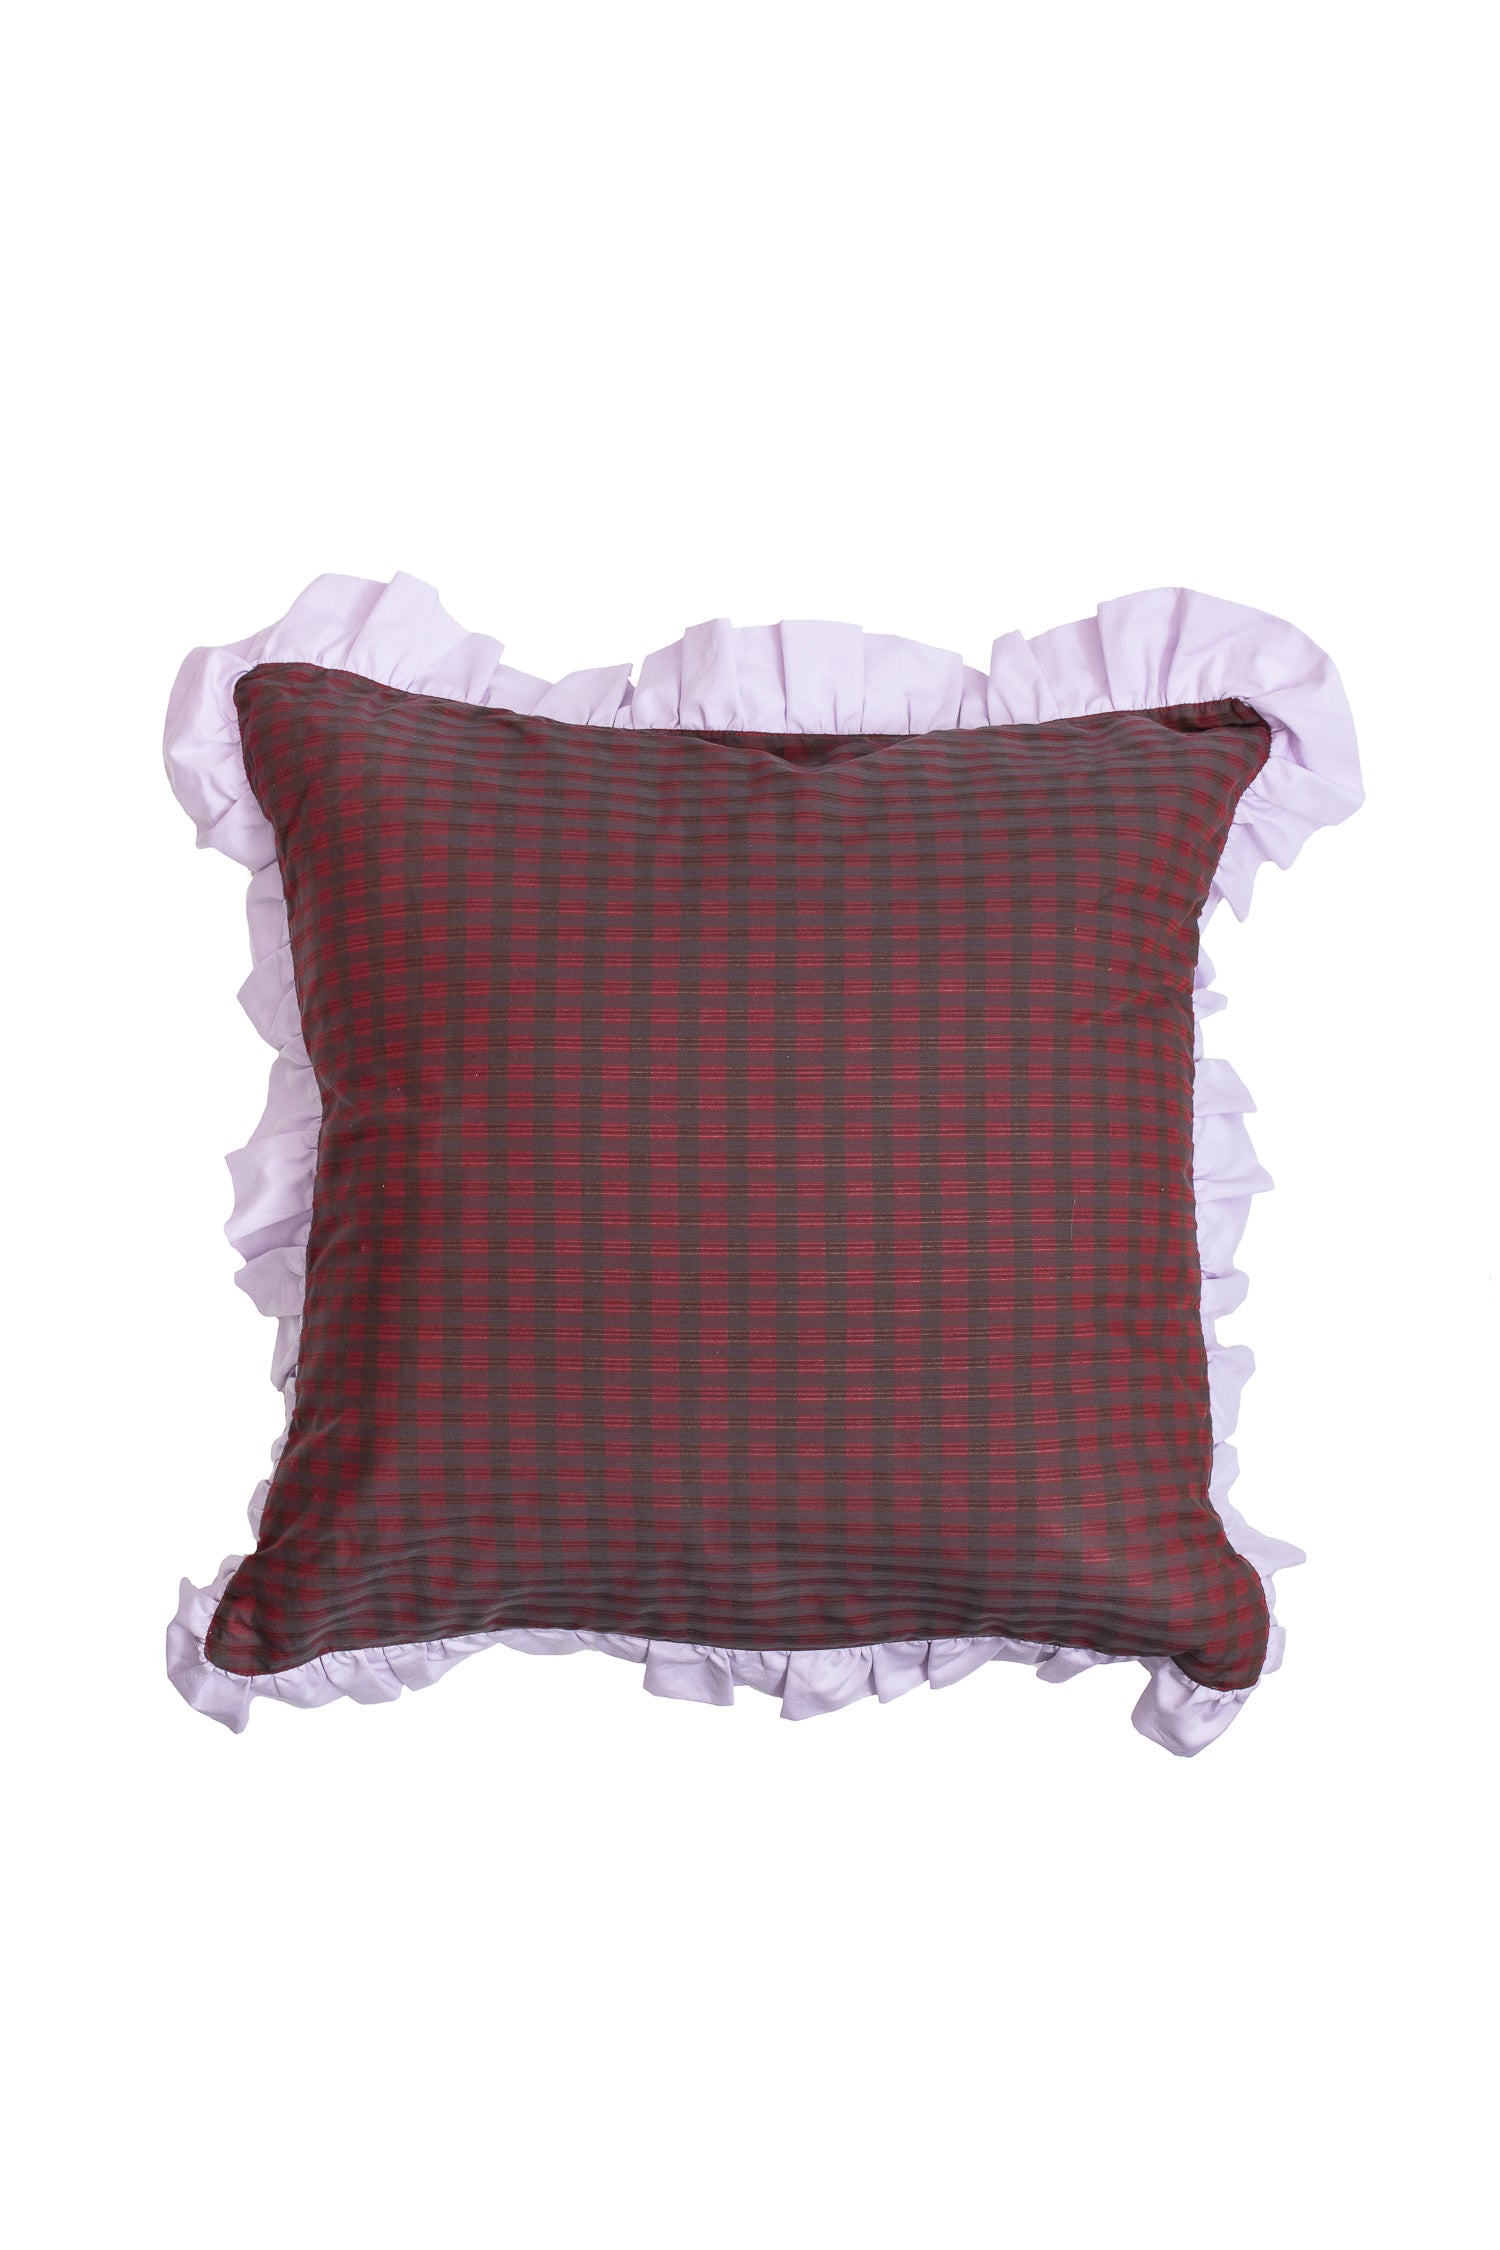 Red check square cushion with lilac ruffles, by Saywood